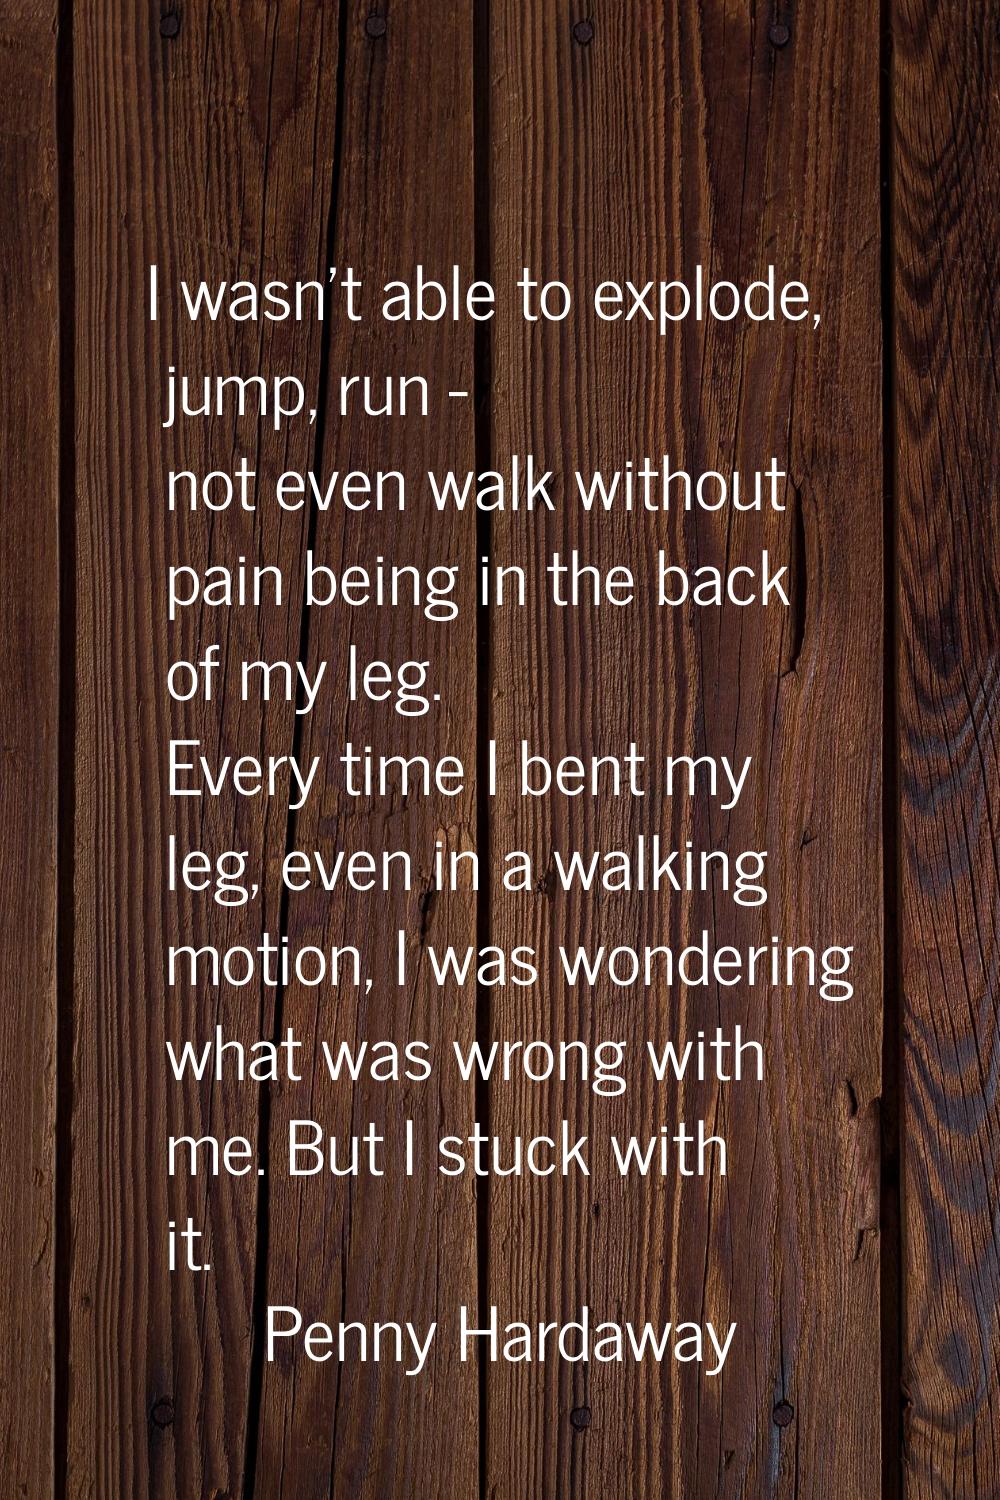 I wasn't able to explode, jump, run - not even walk without pain being in the back of my leg. Every